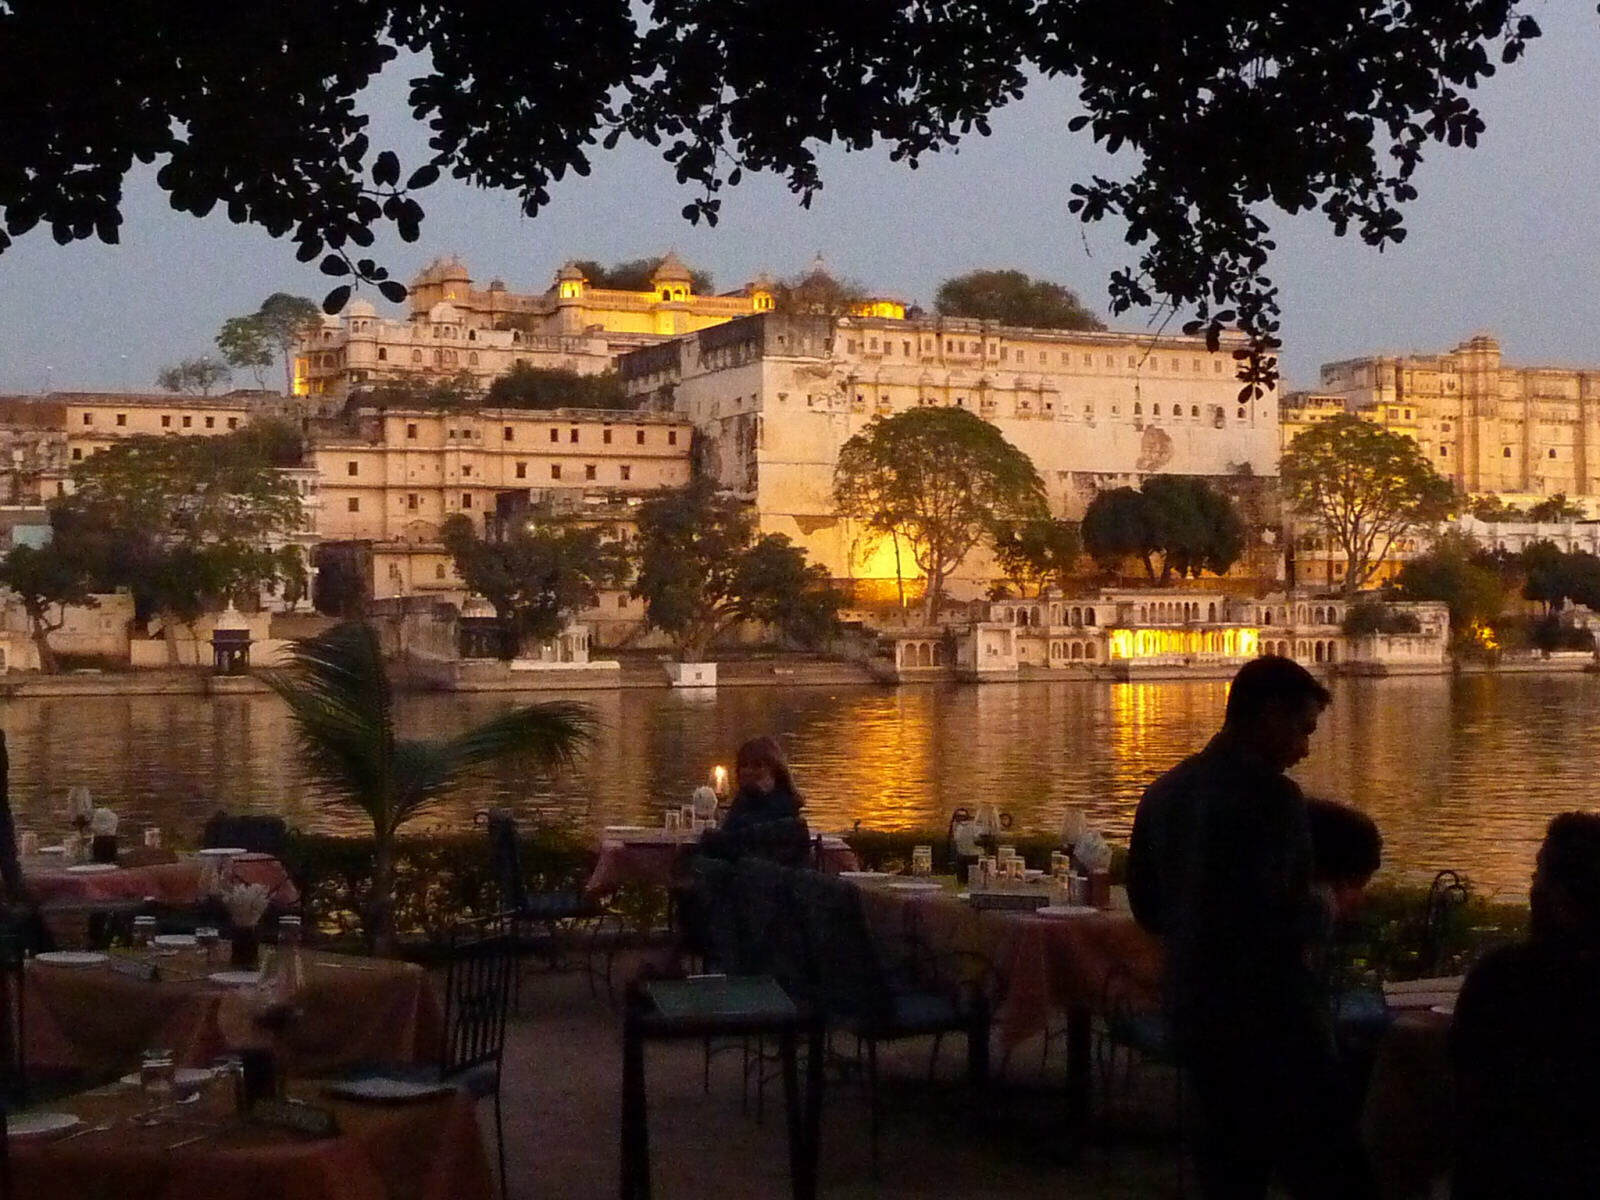 In the Ambrai restaurant by the lake in Udaipur, Rajasthan